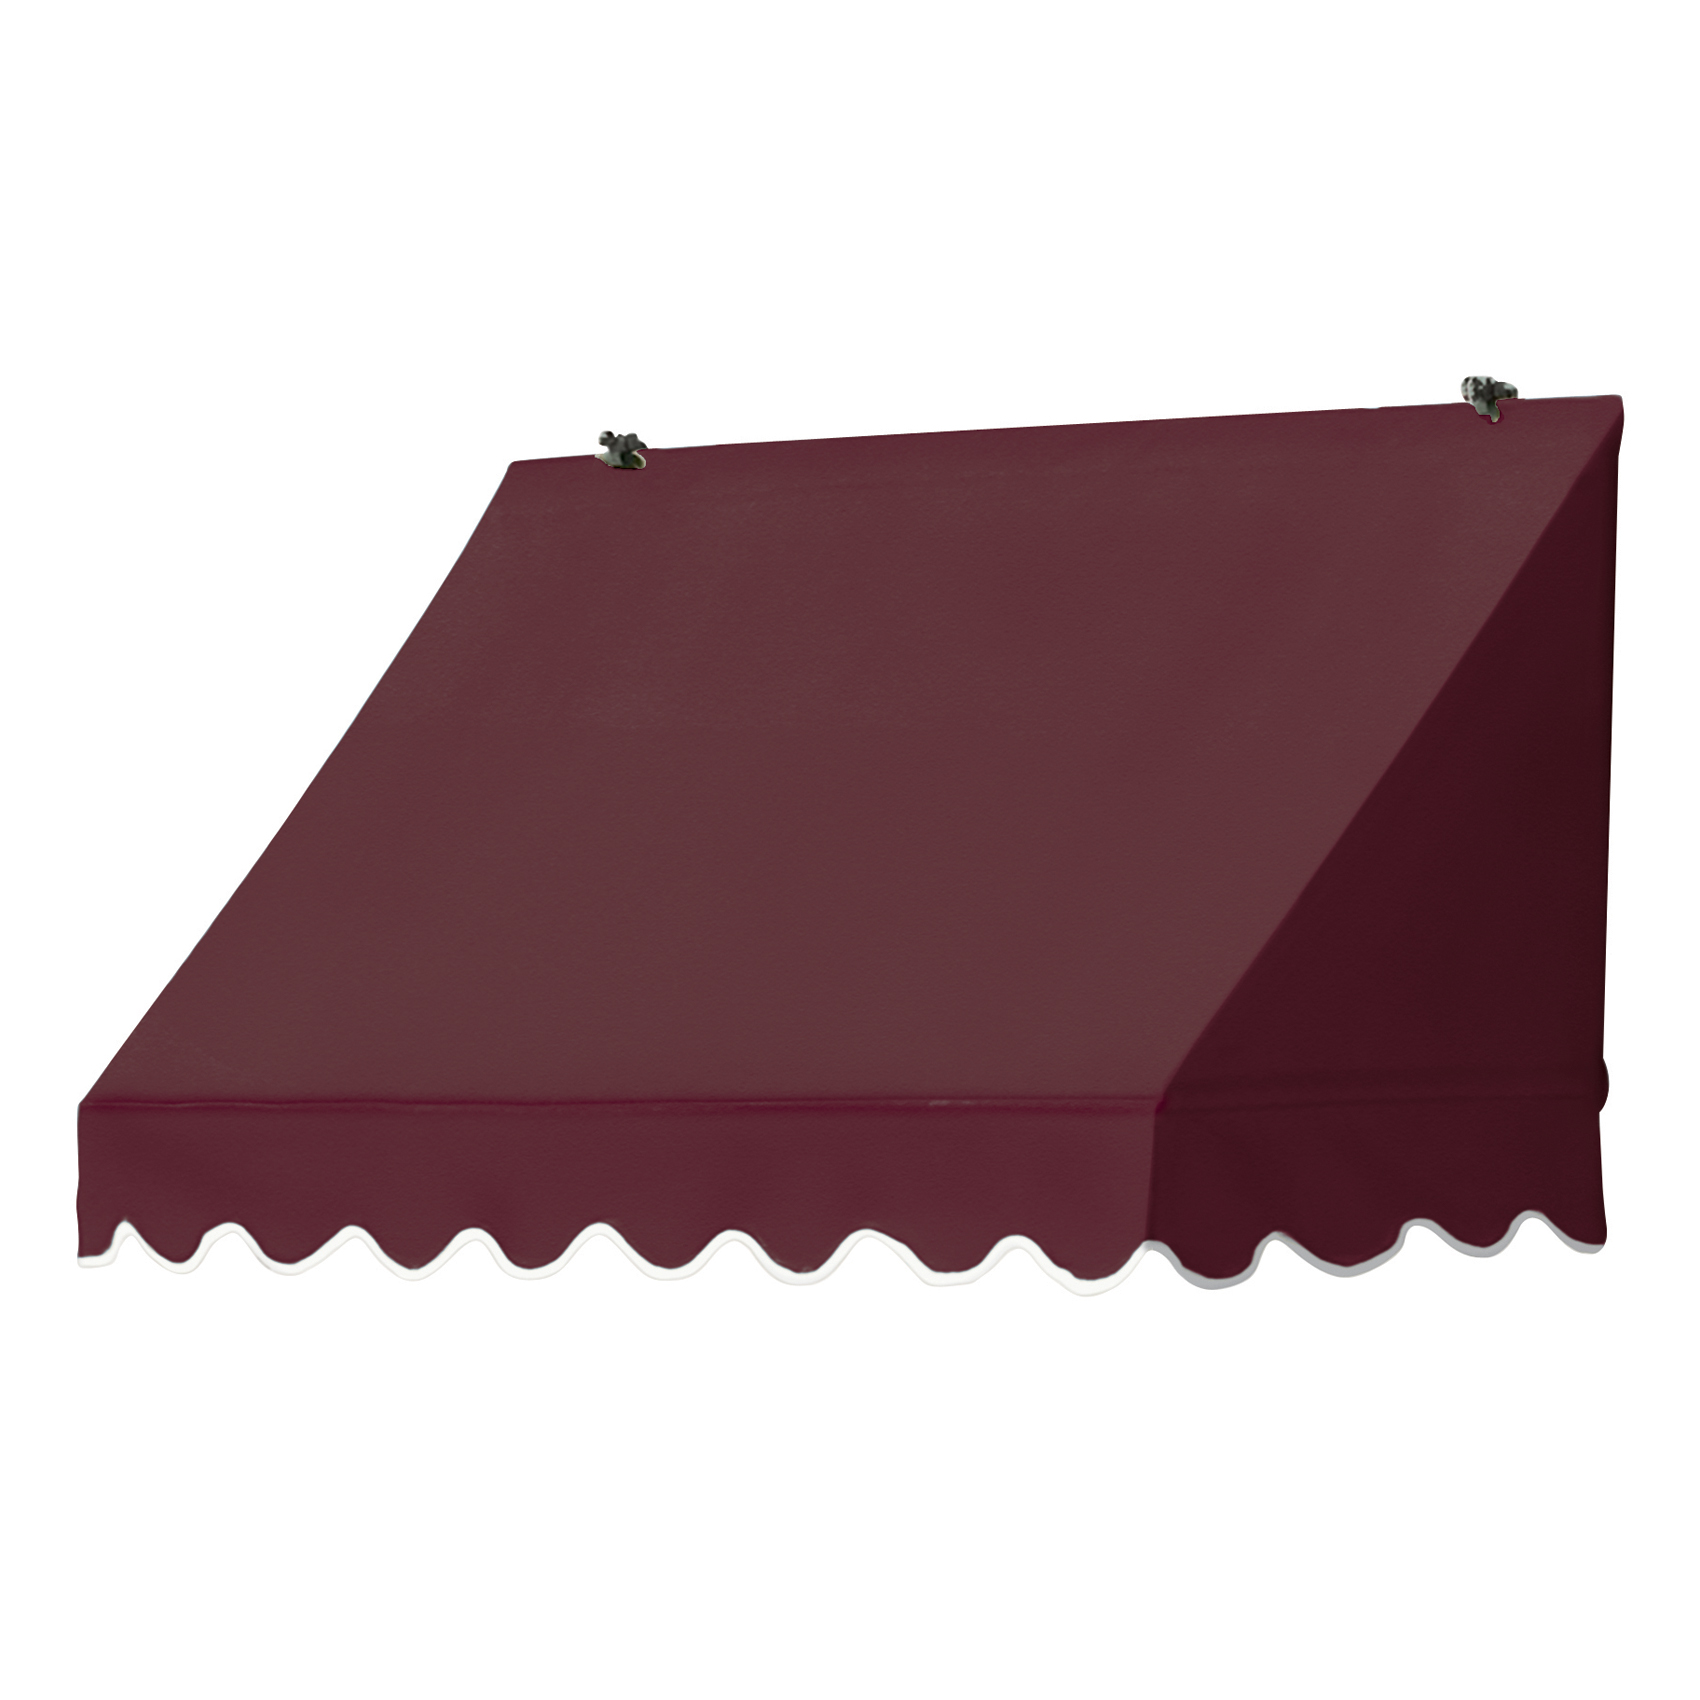 Awnings in a Box&reg; 6' Traditional Style Awning Replacement Cover in Assorted Colors